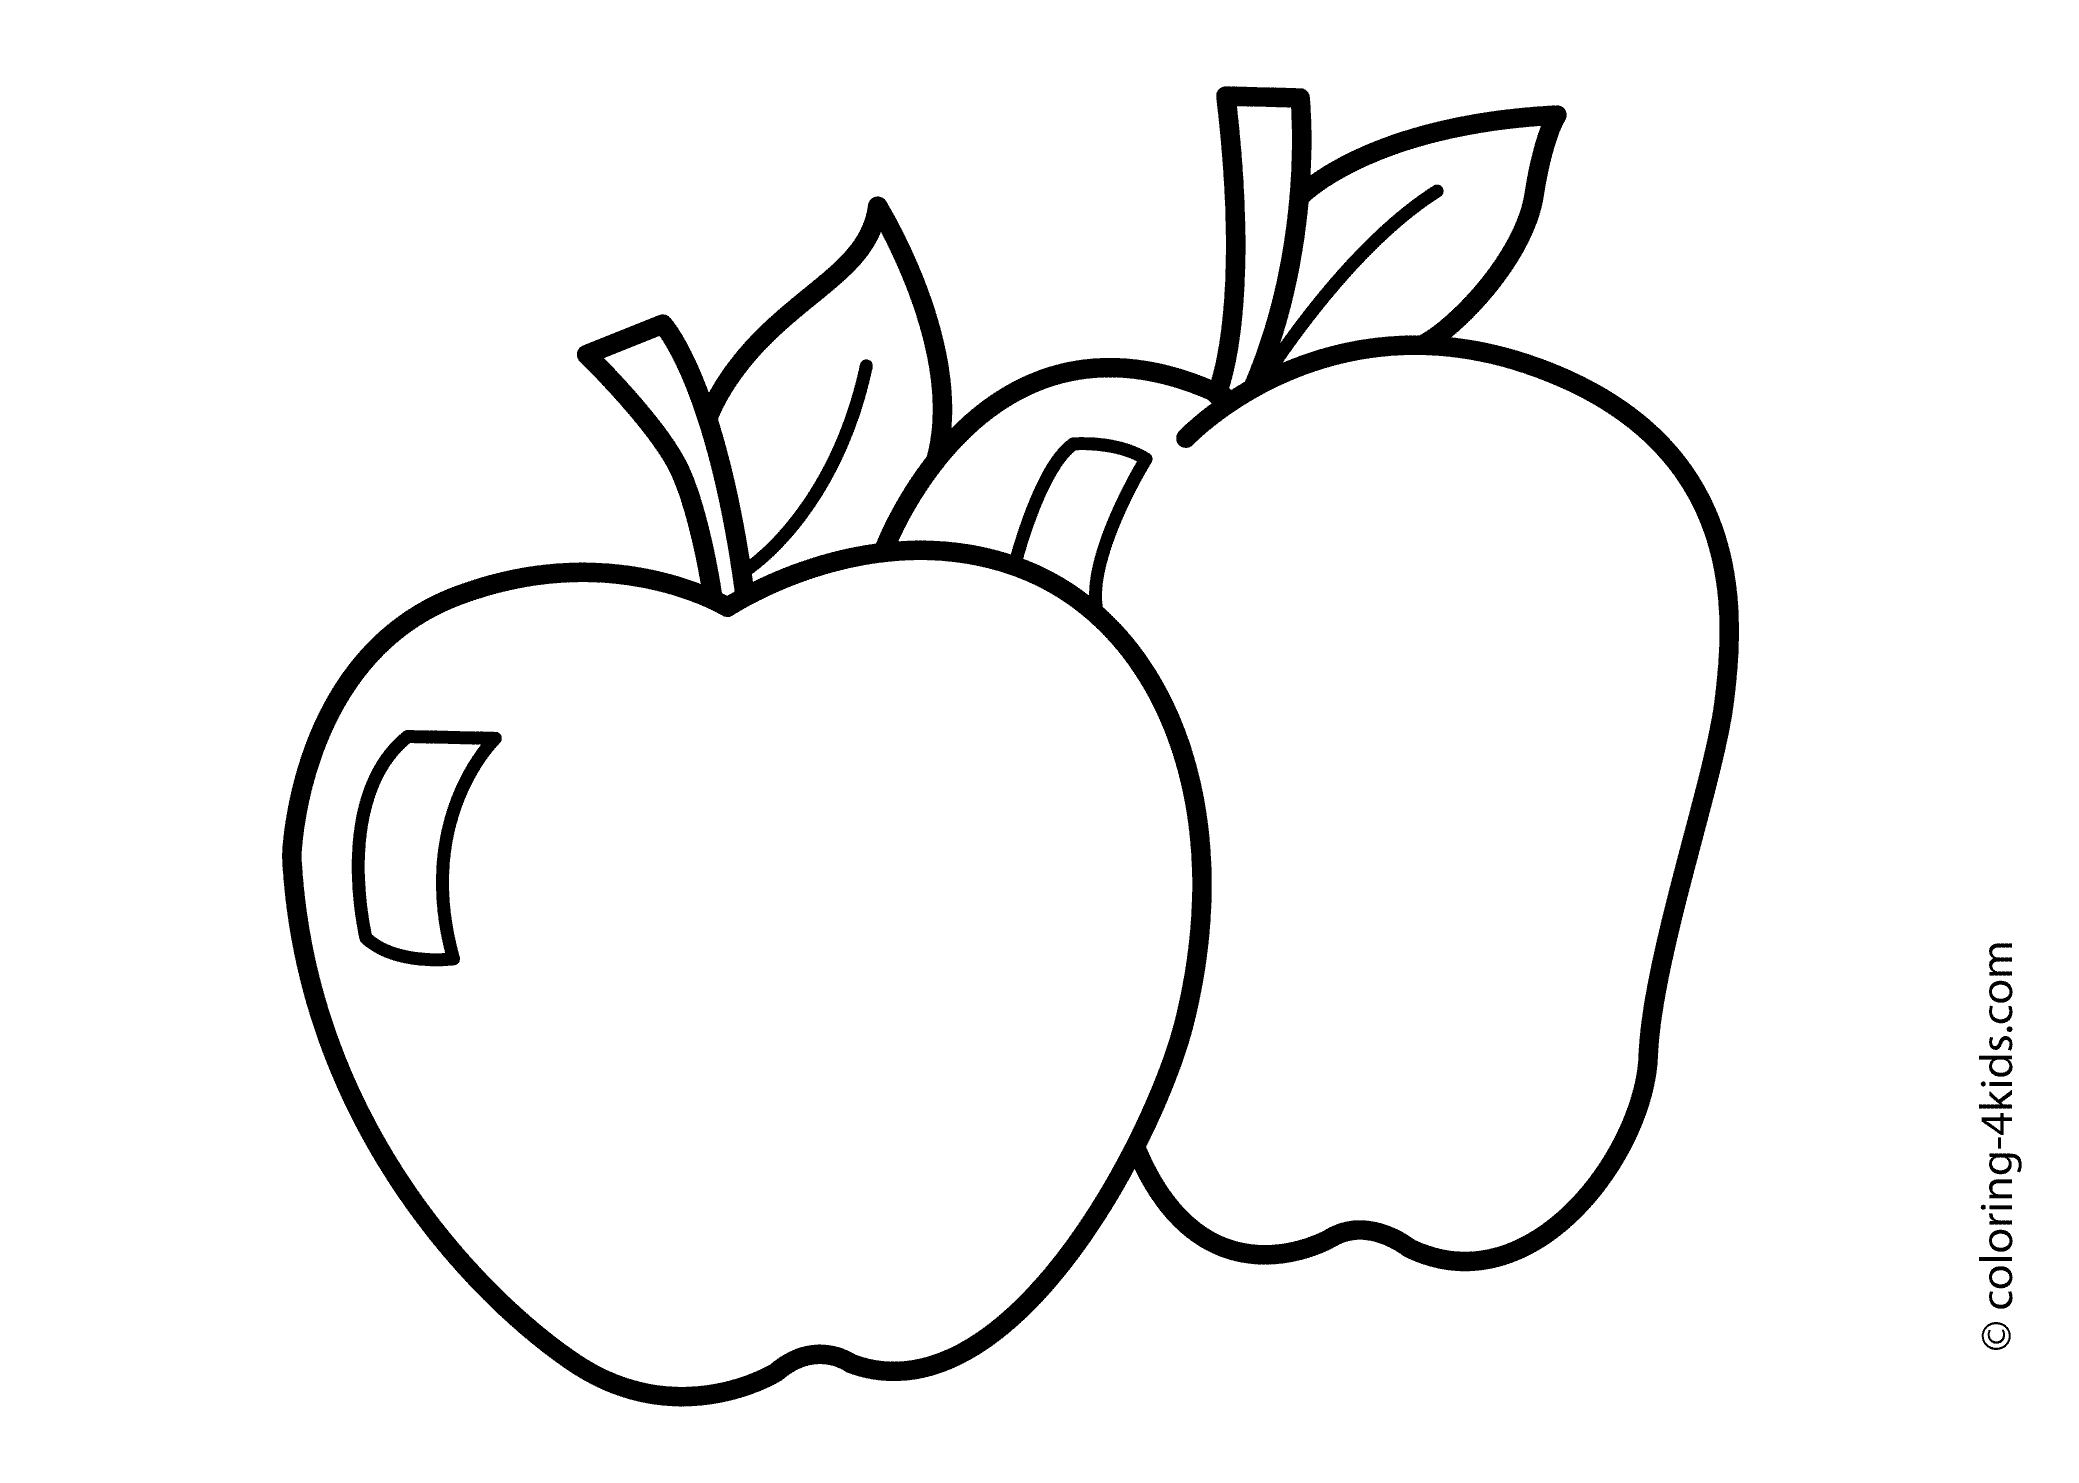 colouring images of apple free 14 apple fruit coloring sheet apple of colouring images 